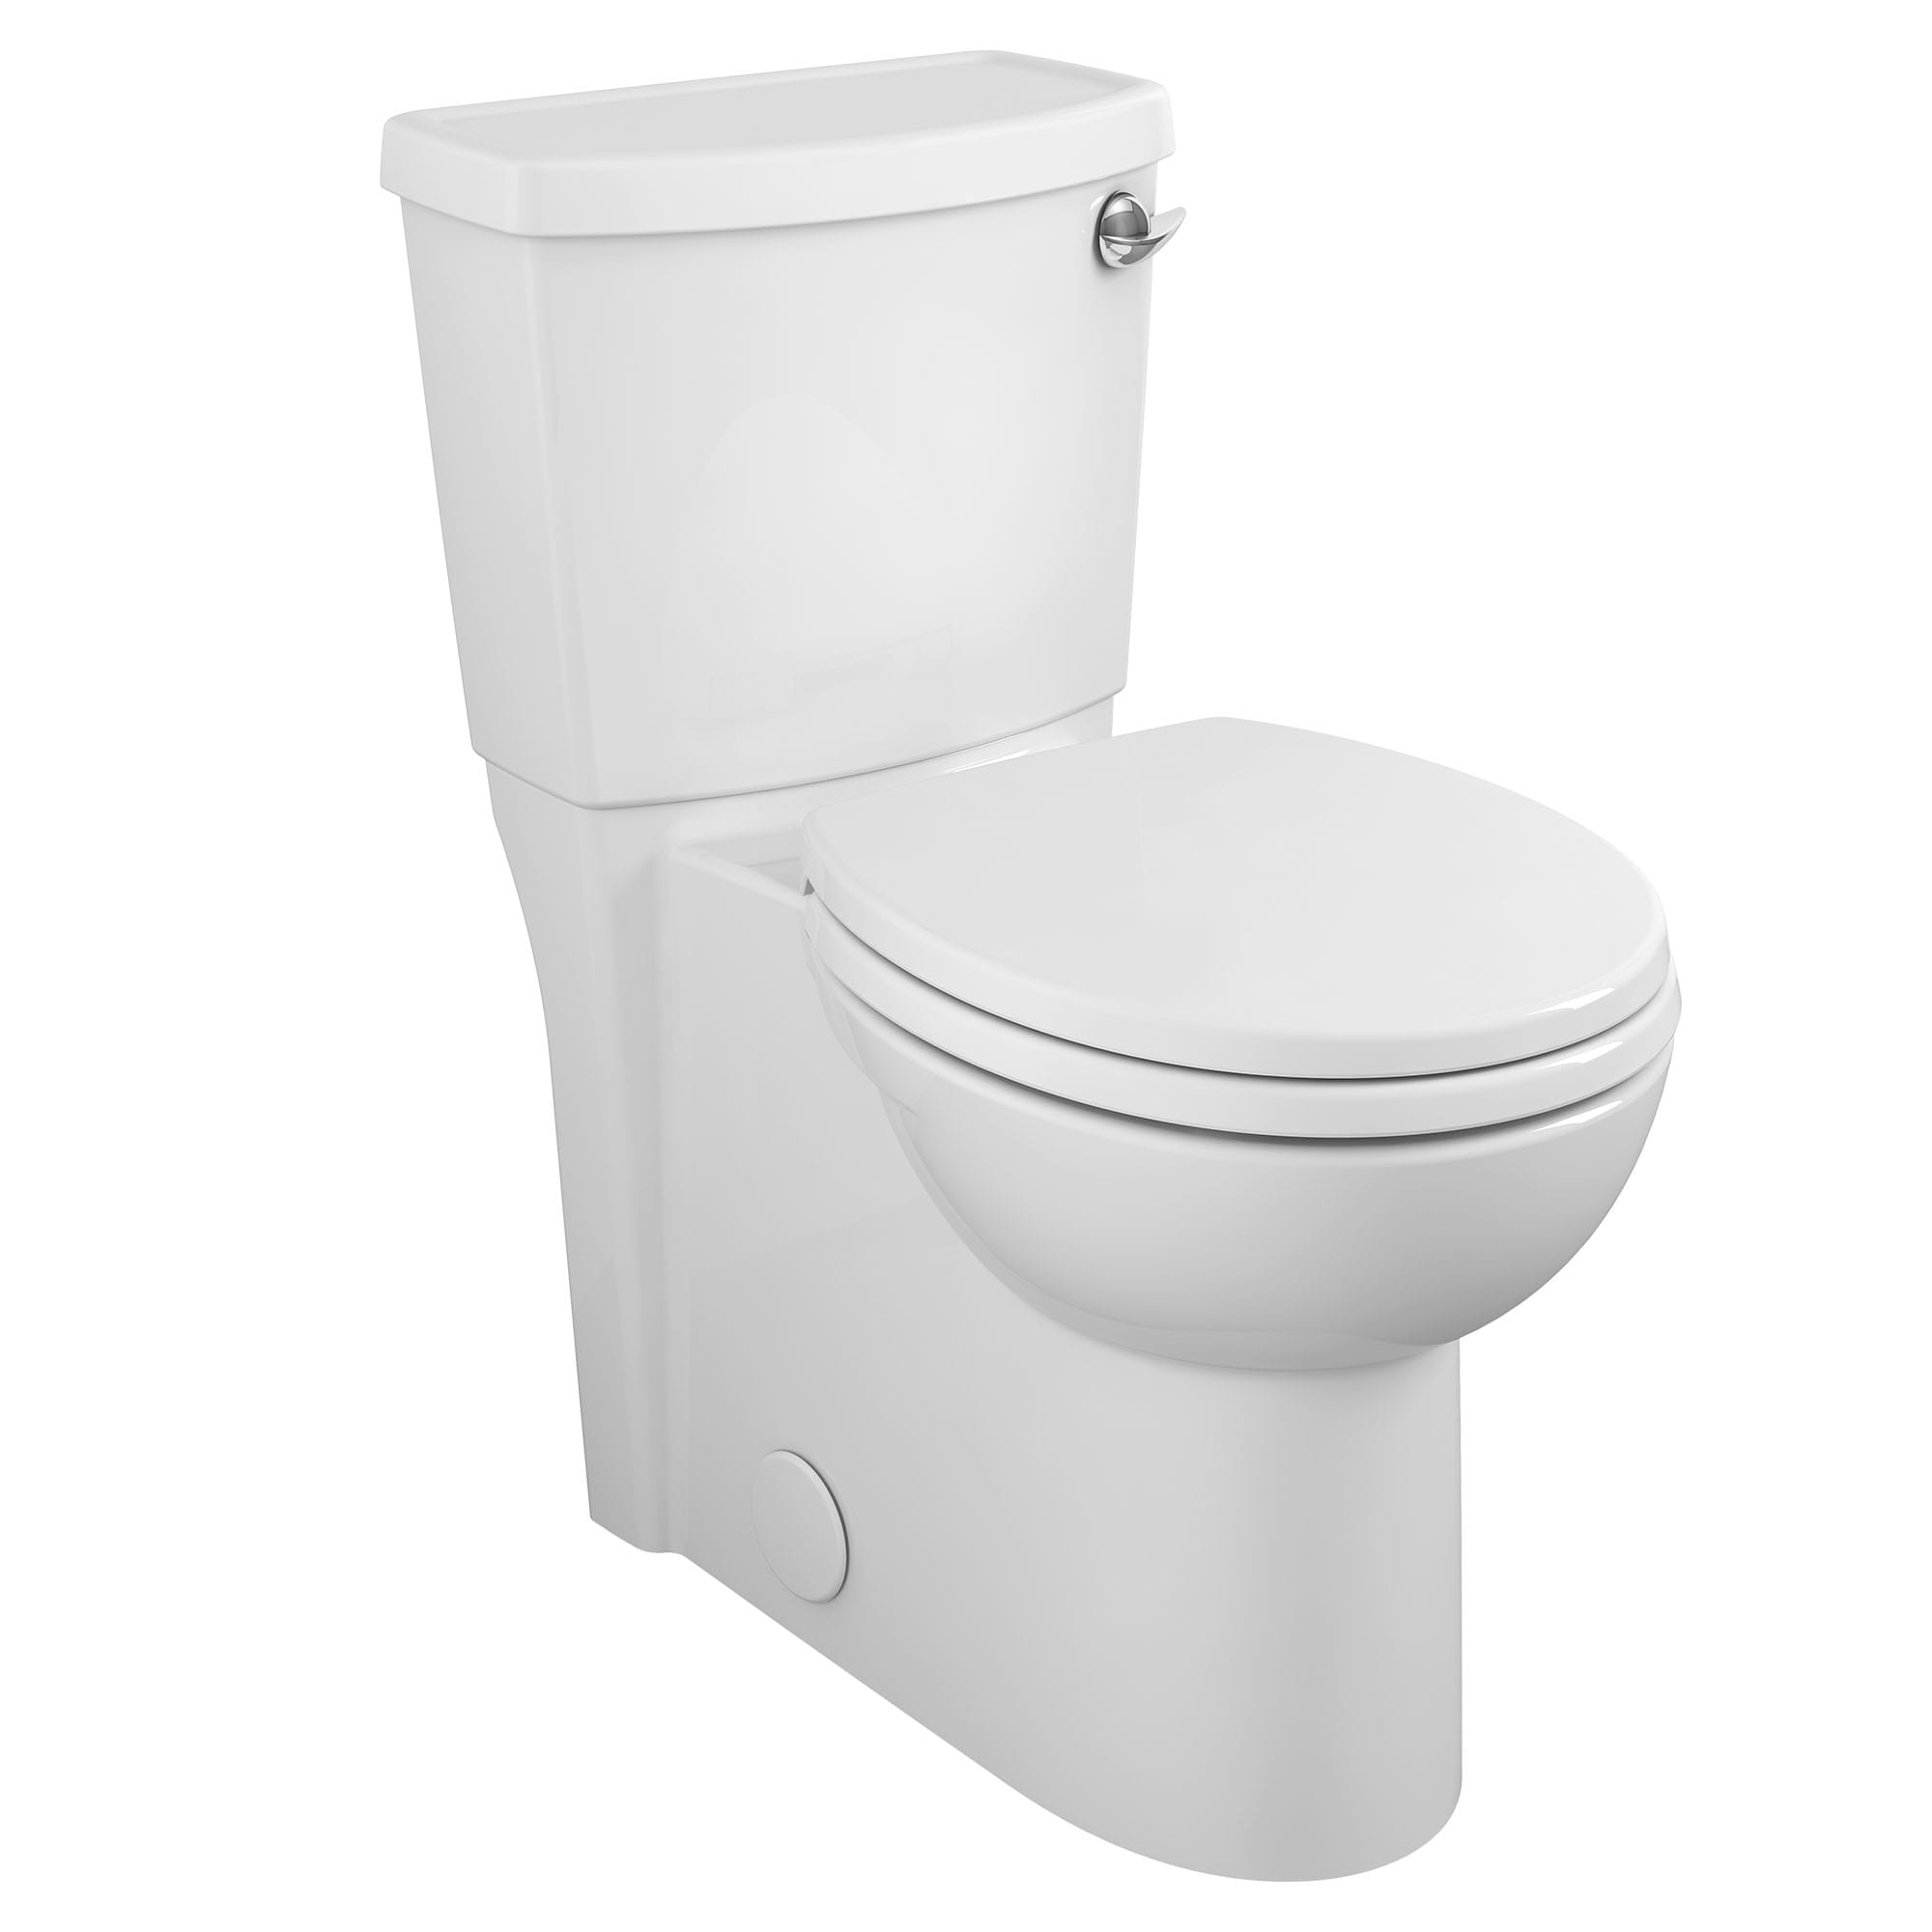 Cadet® 3 FloWise® Skirted Two-Piece 1.28 gpf/4.8 Lpf Chair Height Right-Hand Trip Lever Round Front Toilet With Seat